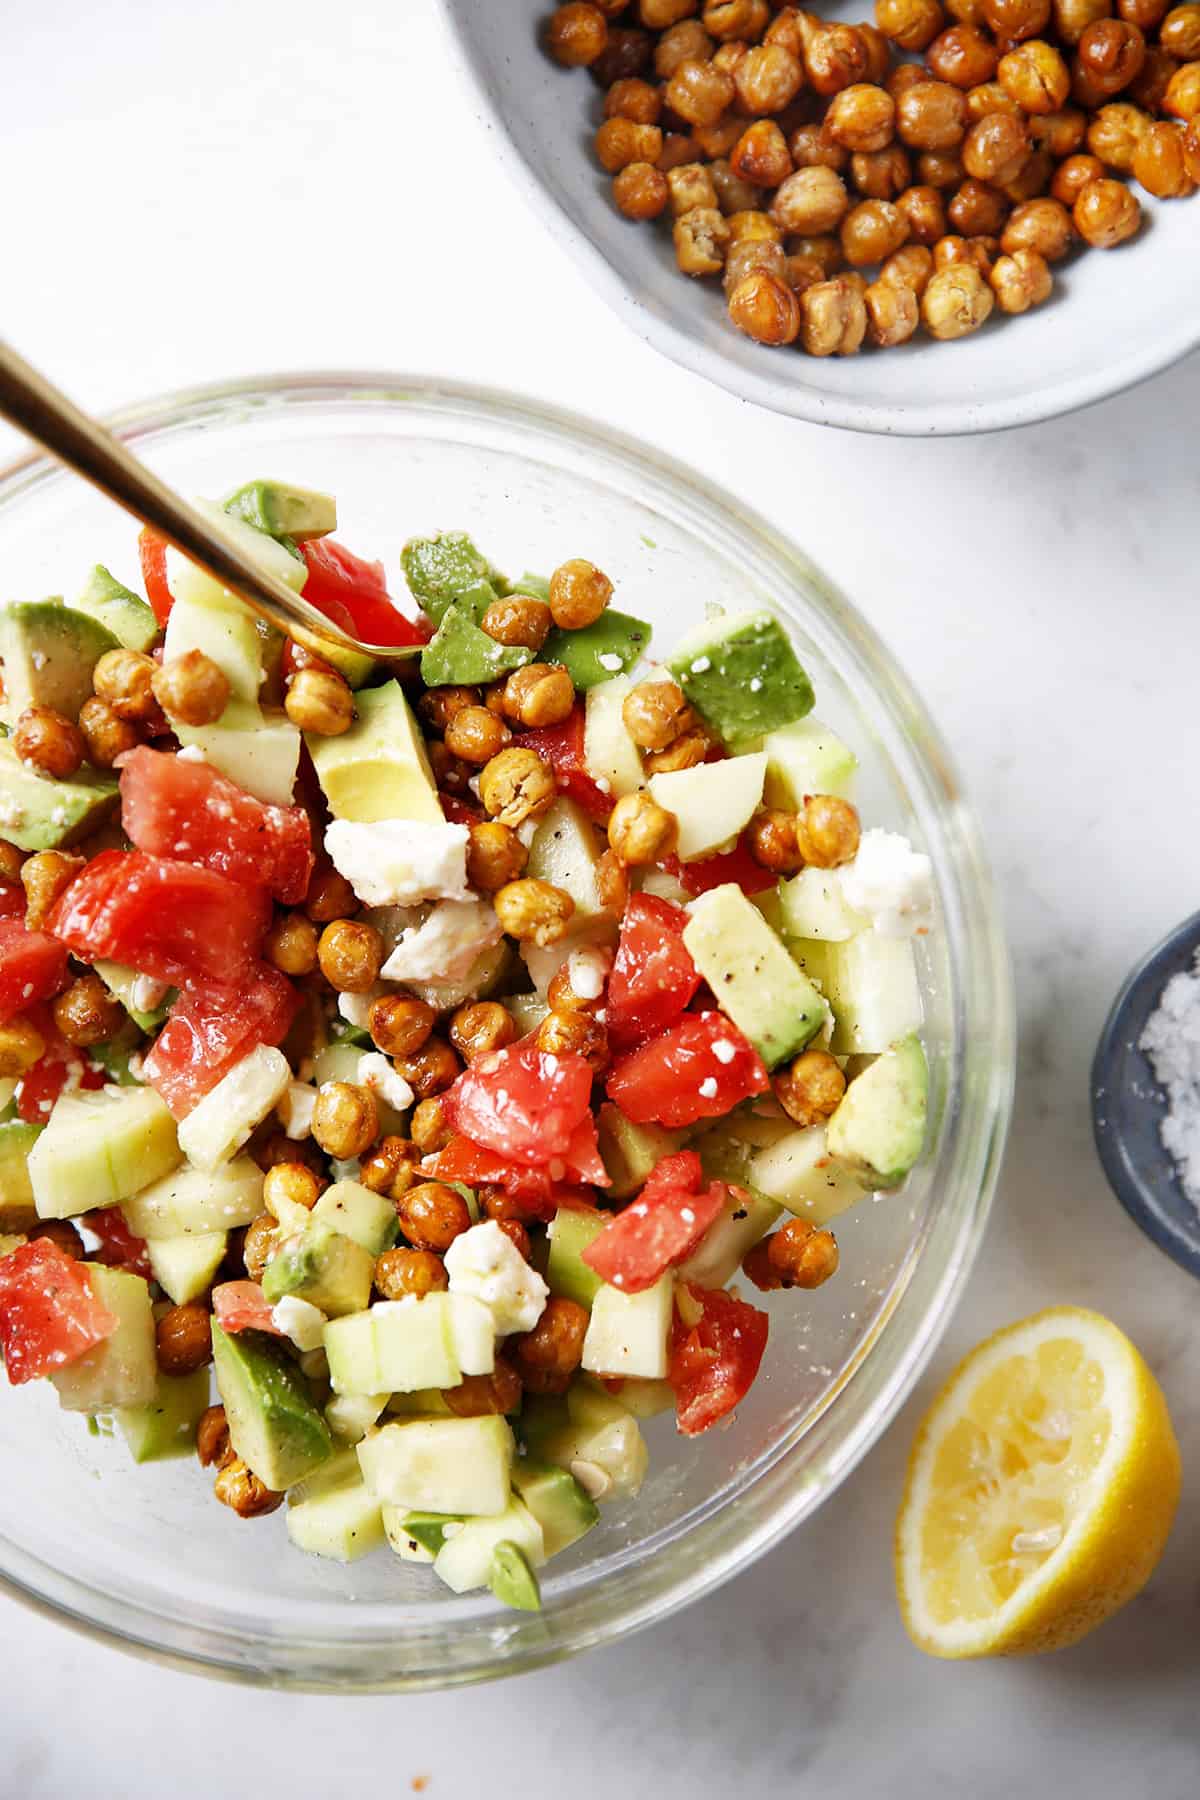 Salad with Crunchy Chickpeas